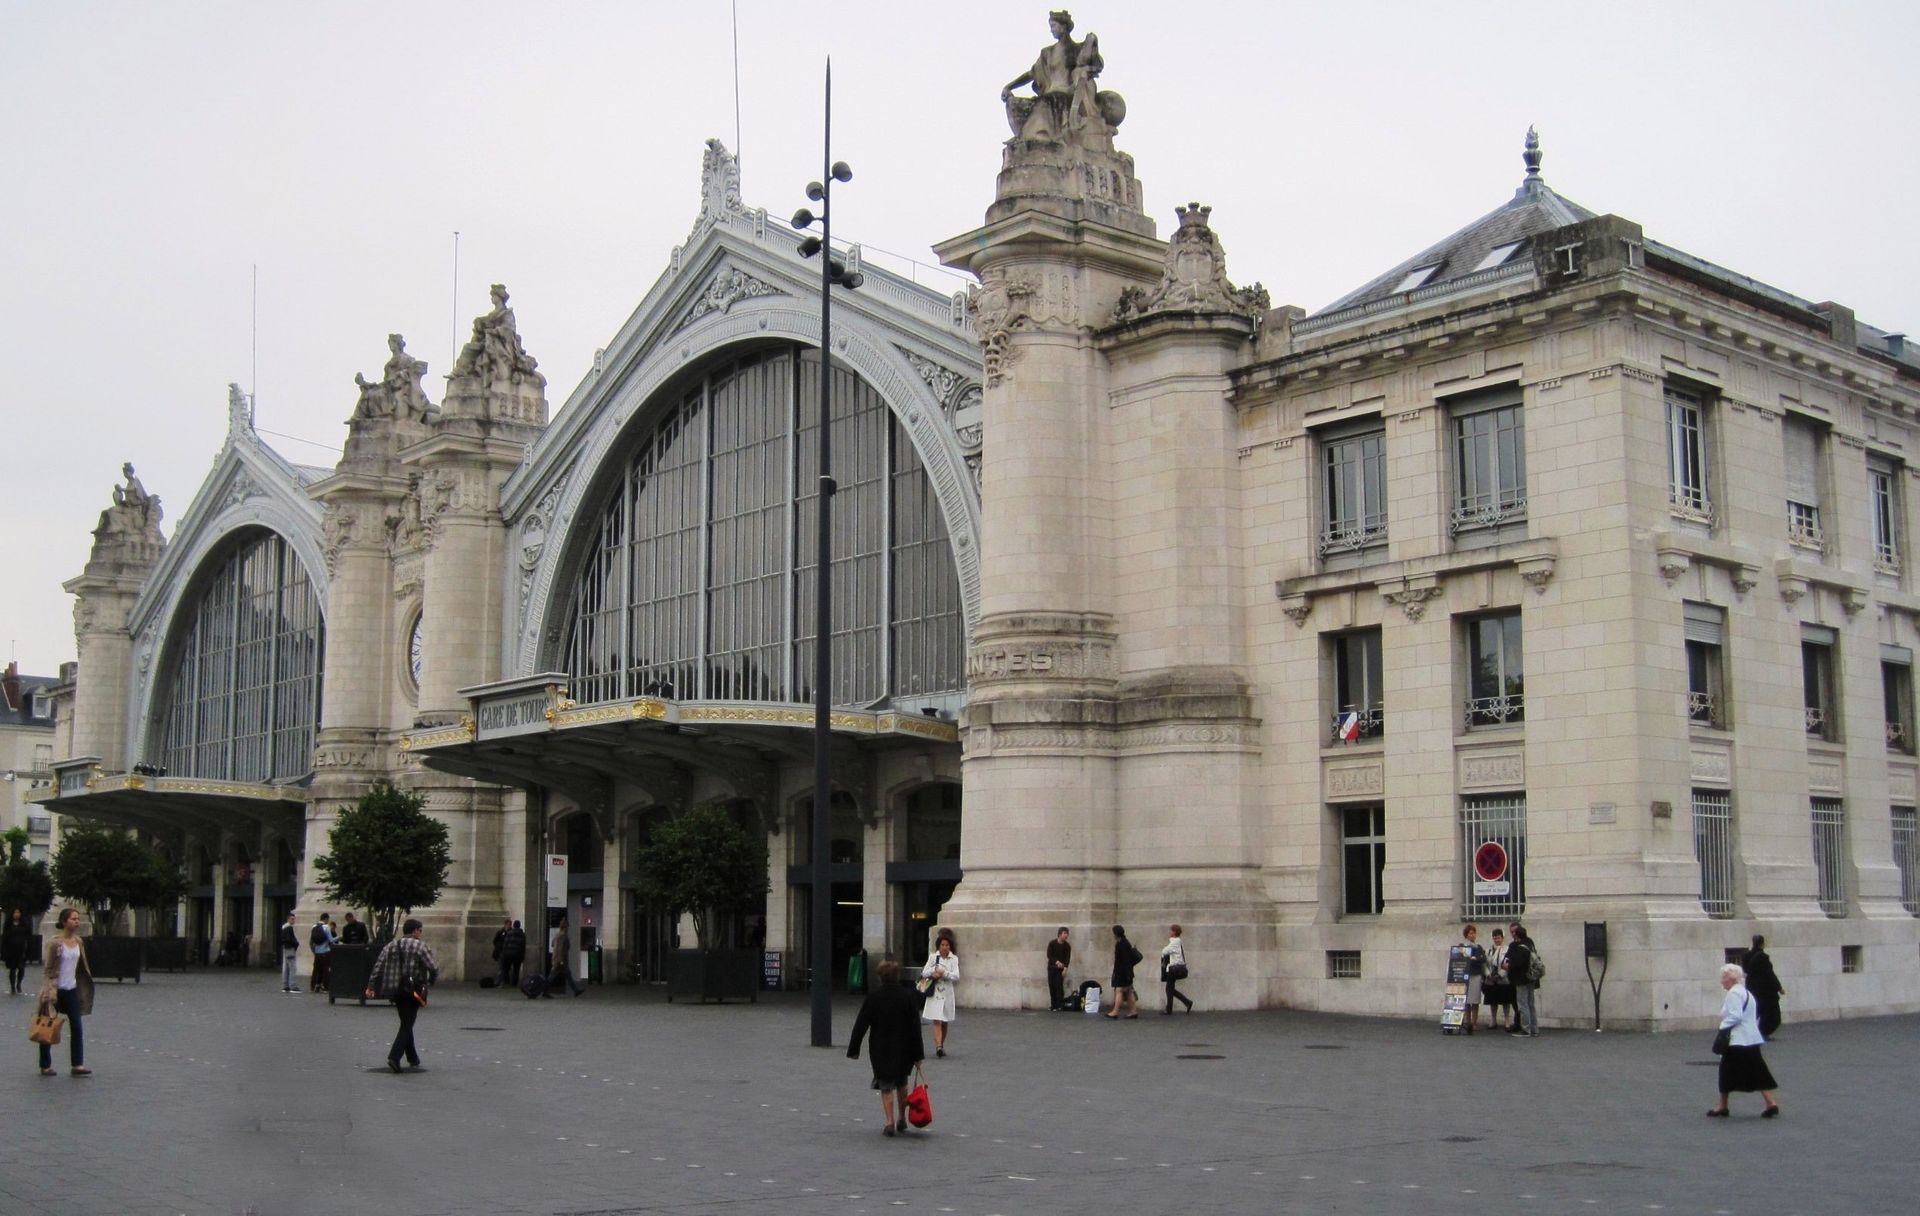 View of the grand front elevation of the railway station in Tours